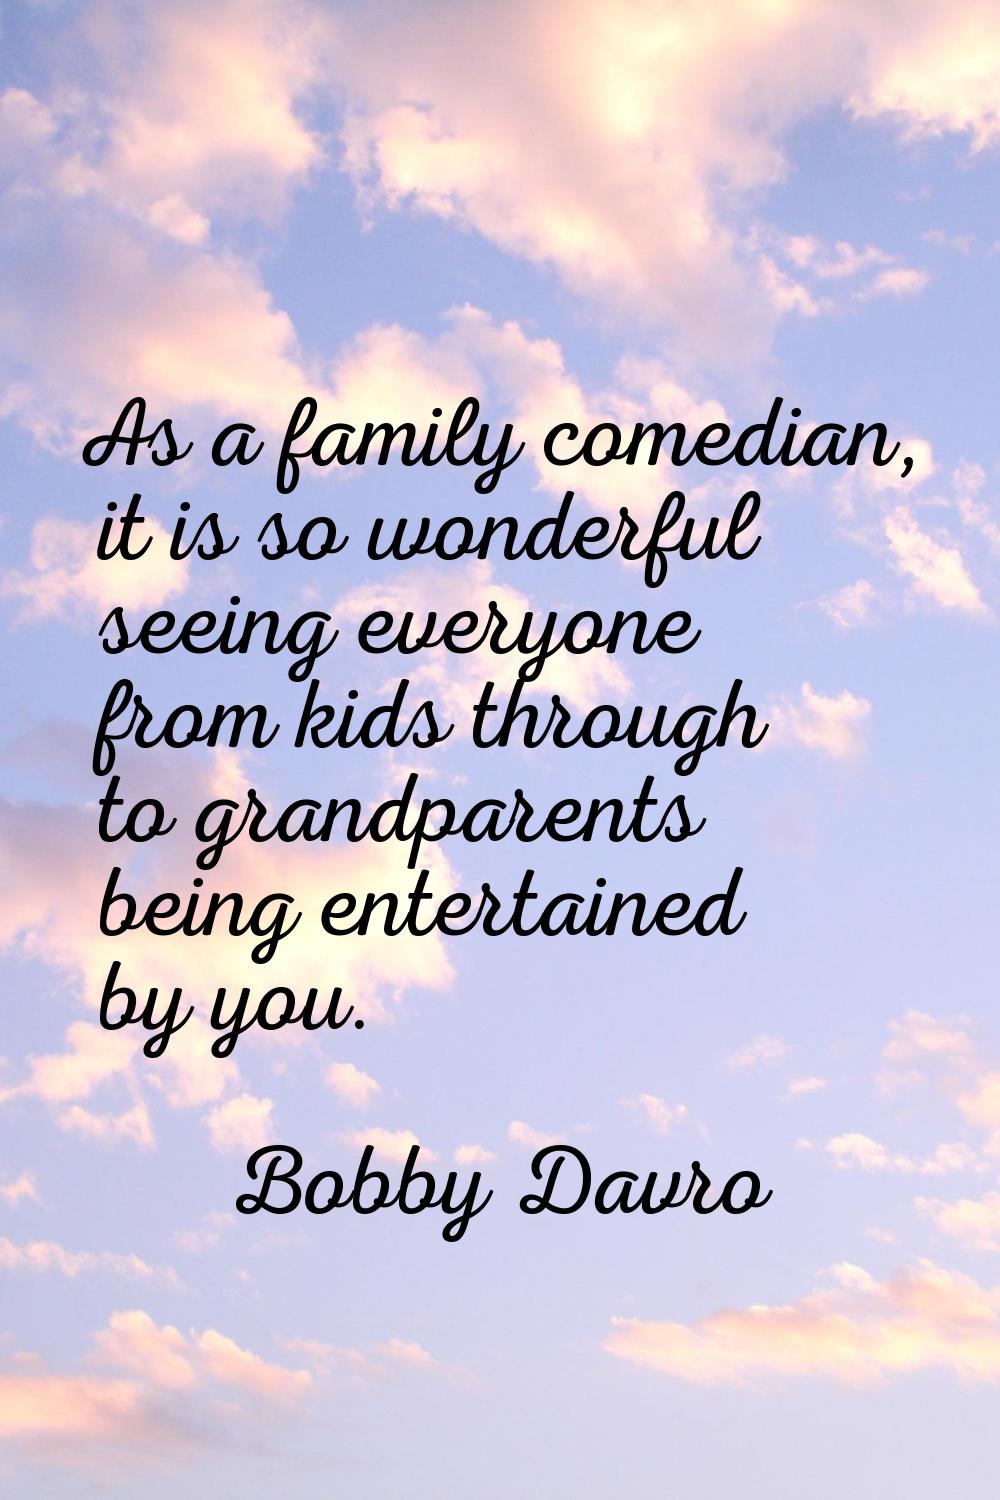 As a family comedian, it is so wonderful seeing everyone from kids through to grandparents being en